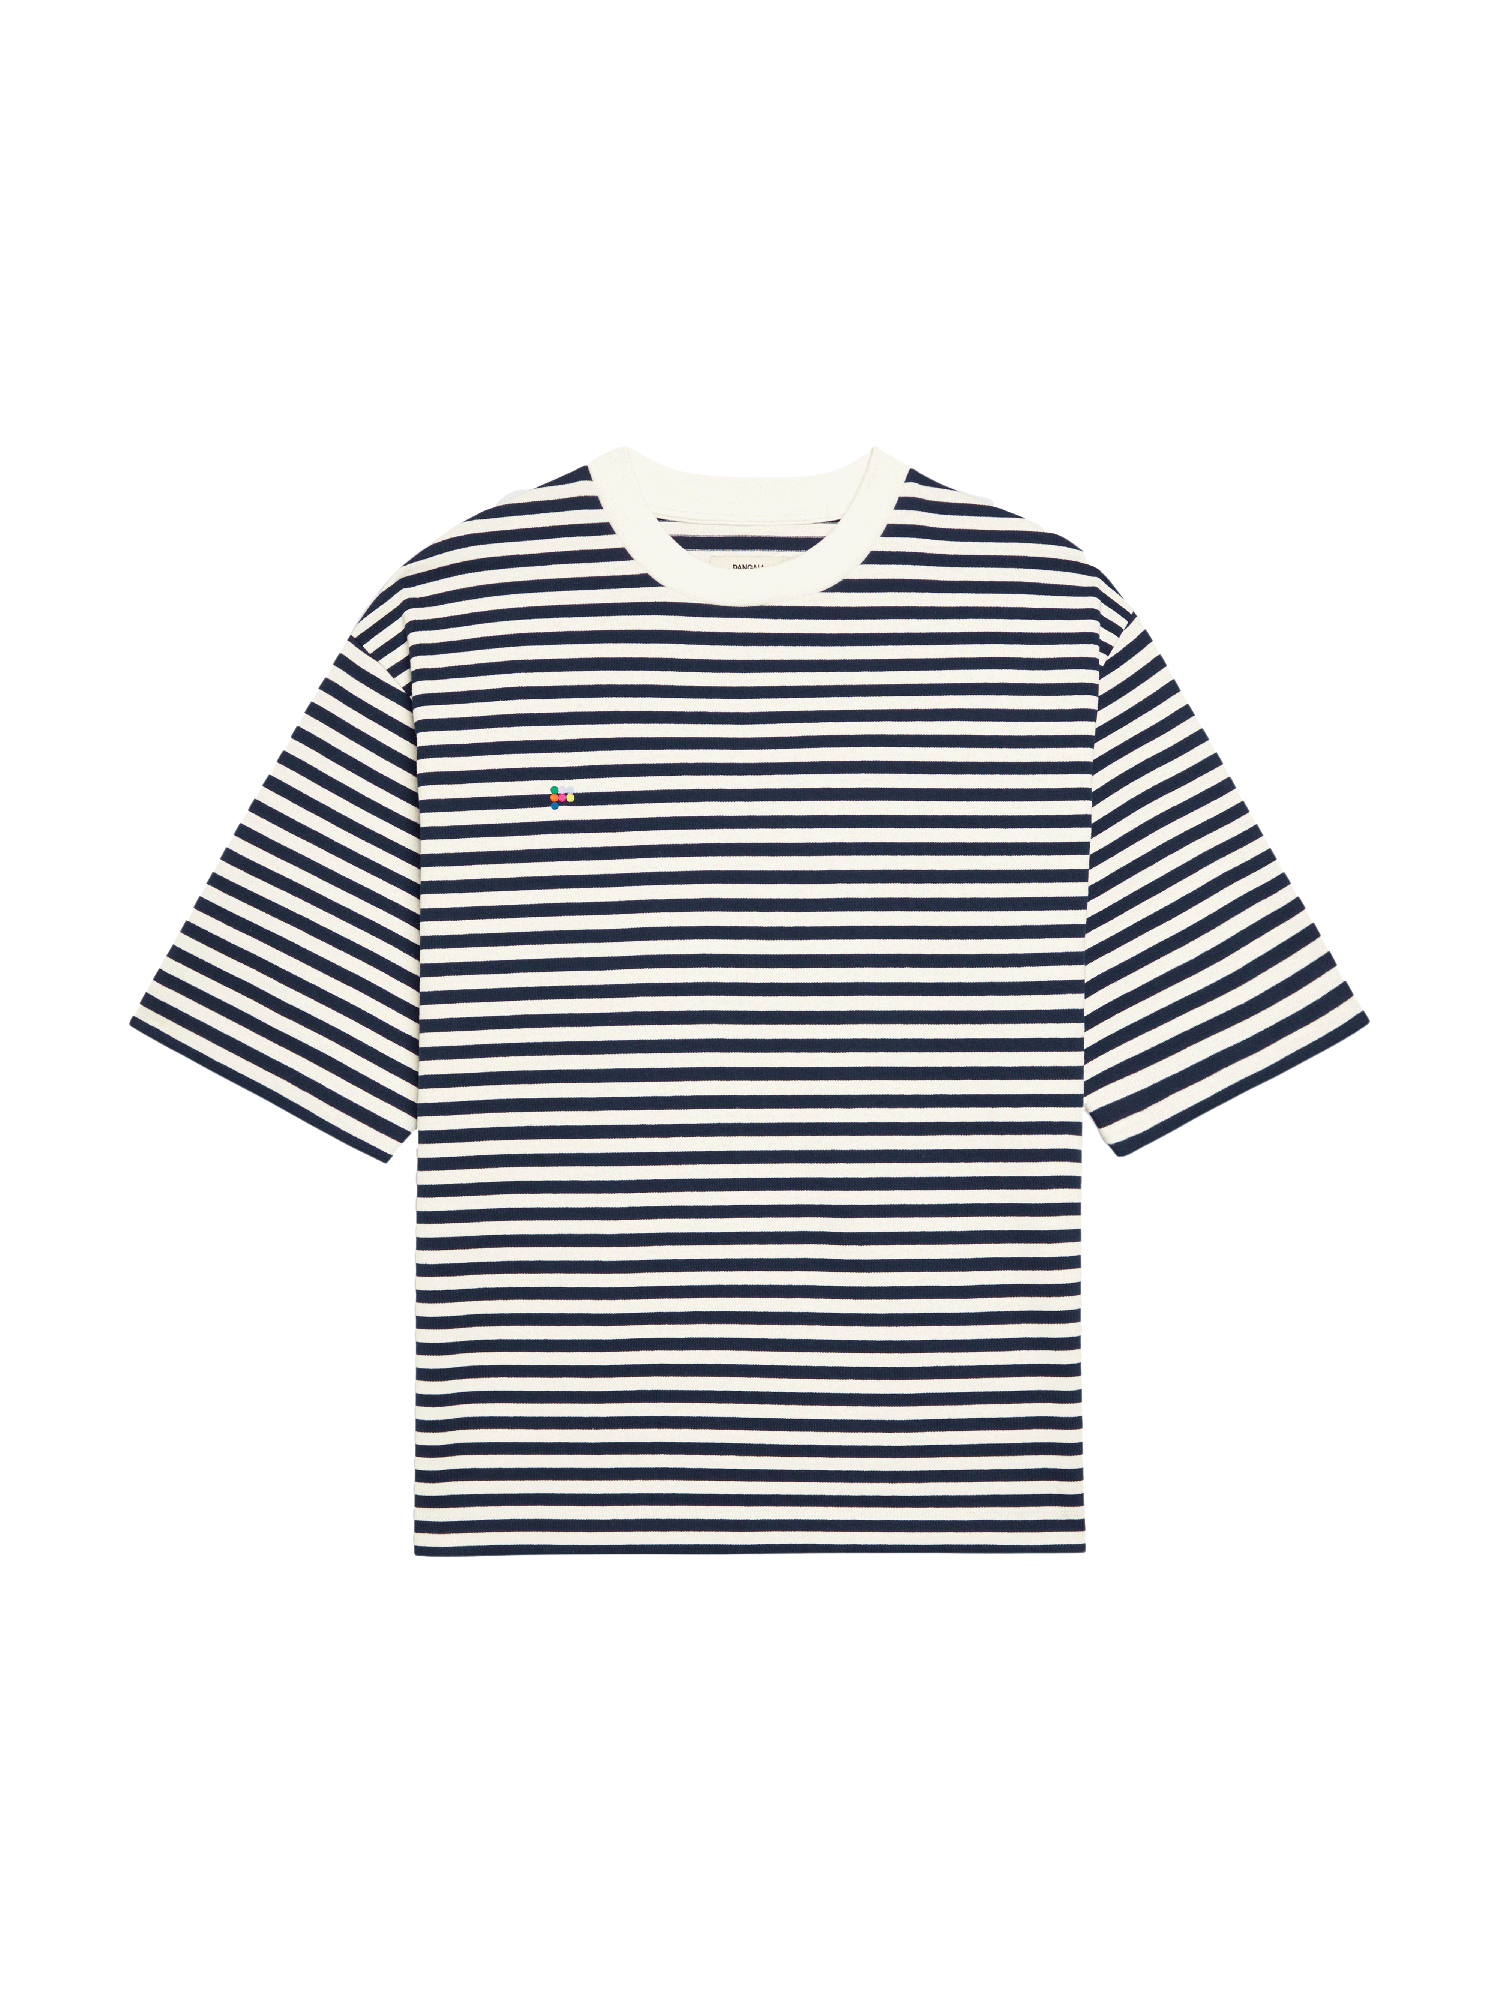 https://storage.googleapis.com/download/storage/v1/b/whering.appspot.com/o/marketplace_product_images%2Fpangaia-recycled-cotton-stripe-boxy-tshirtnavy-blue-faanHfiLbEzDNYfqTfzFRb.png?generation=1690693230178936&alt=media